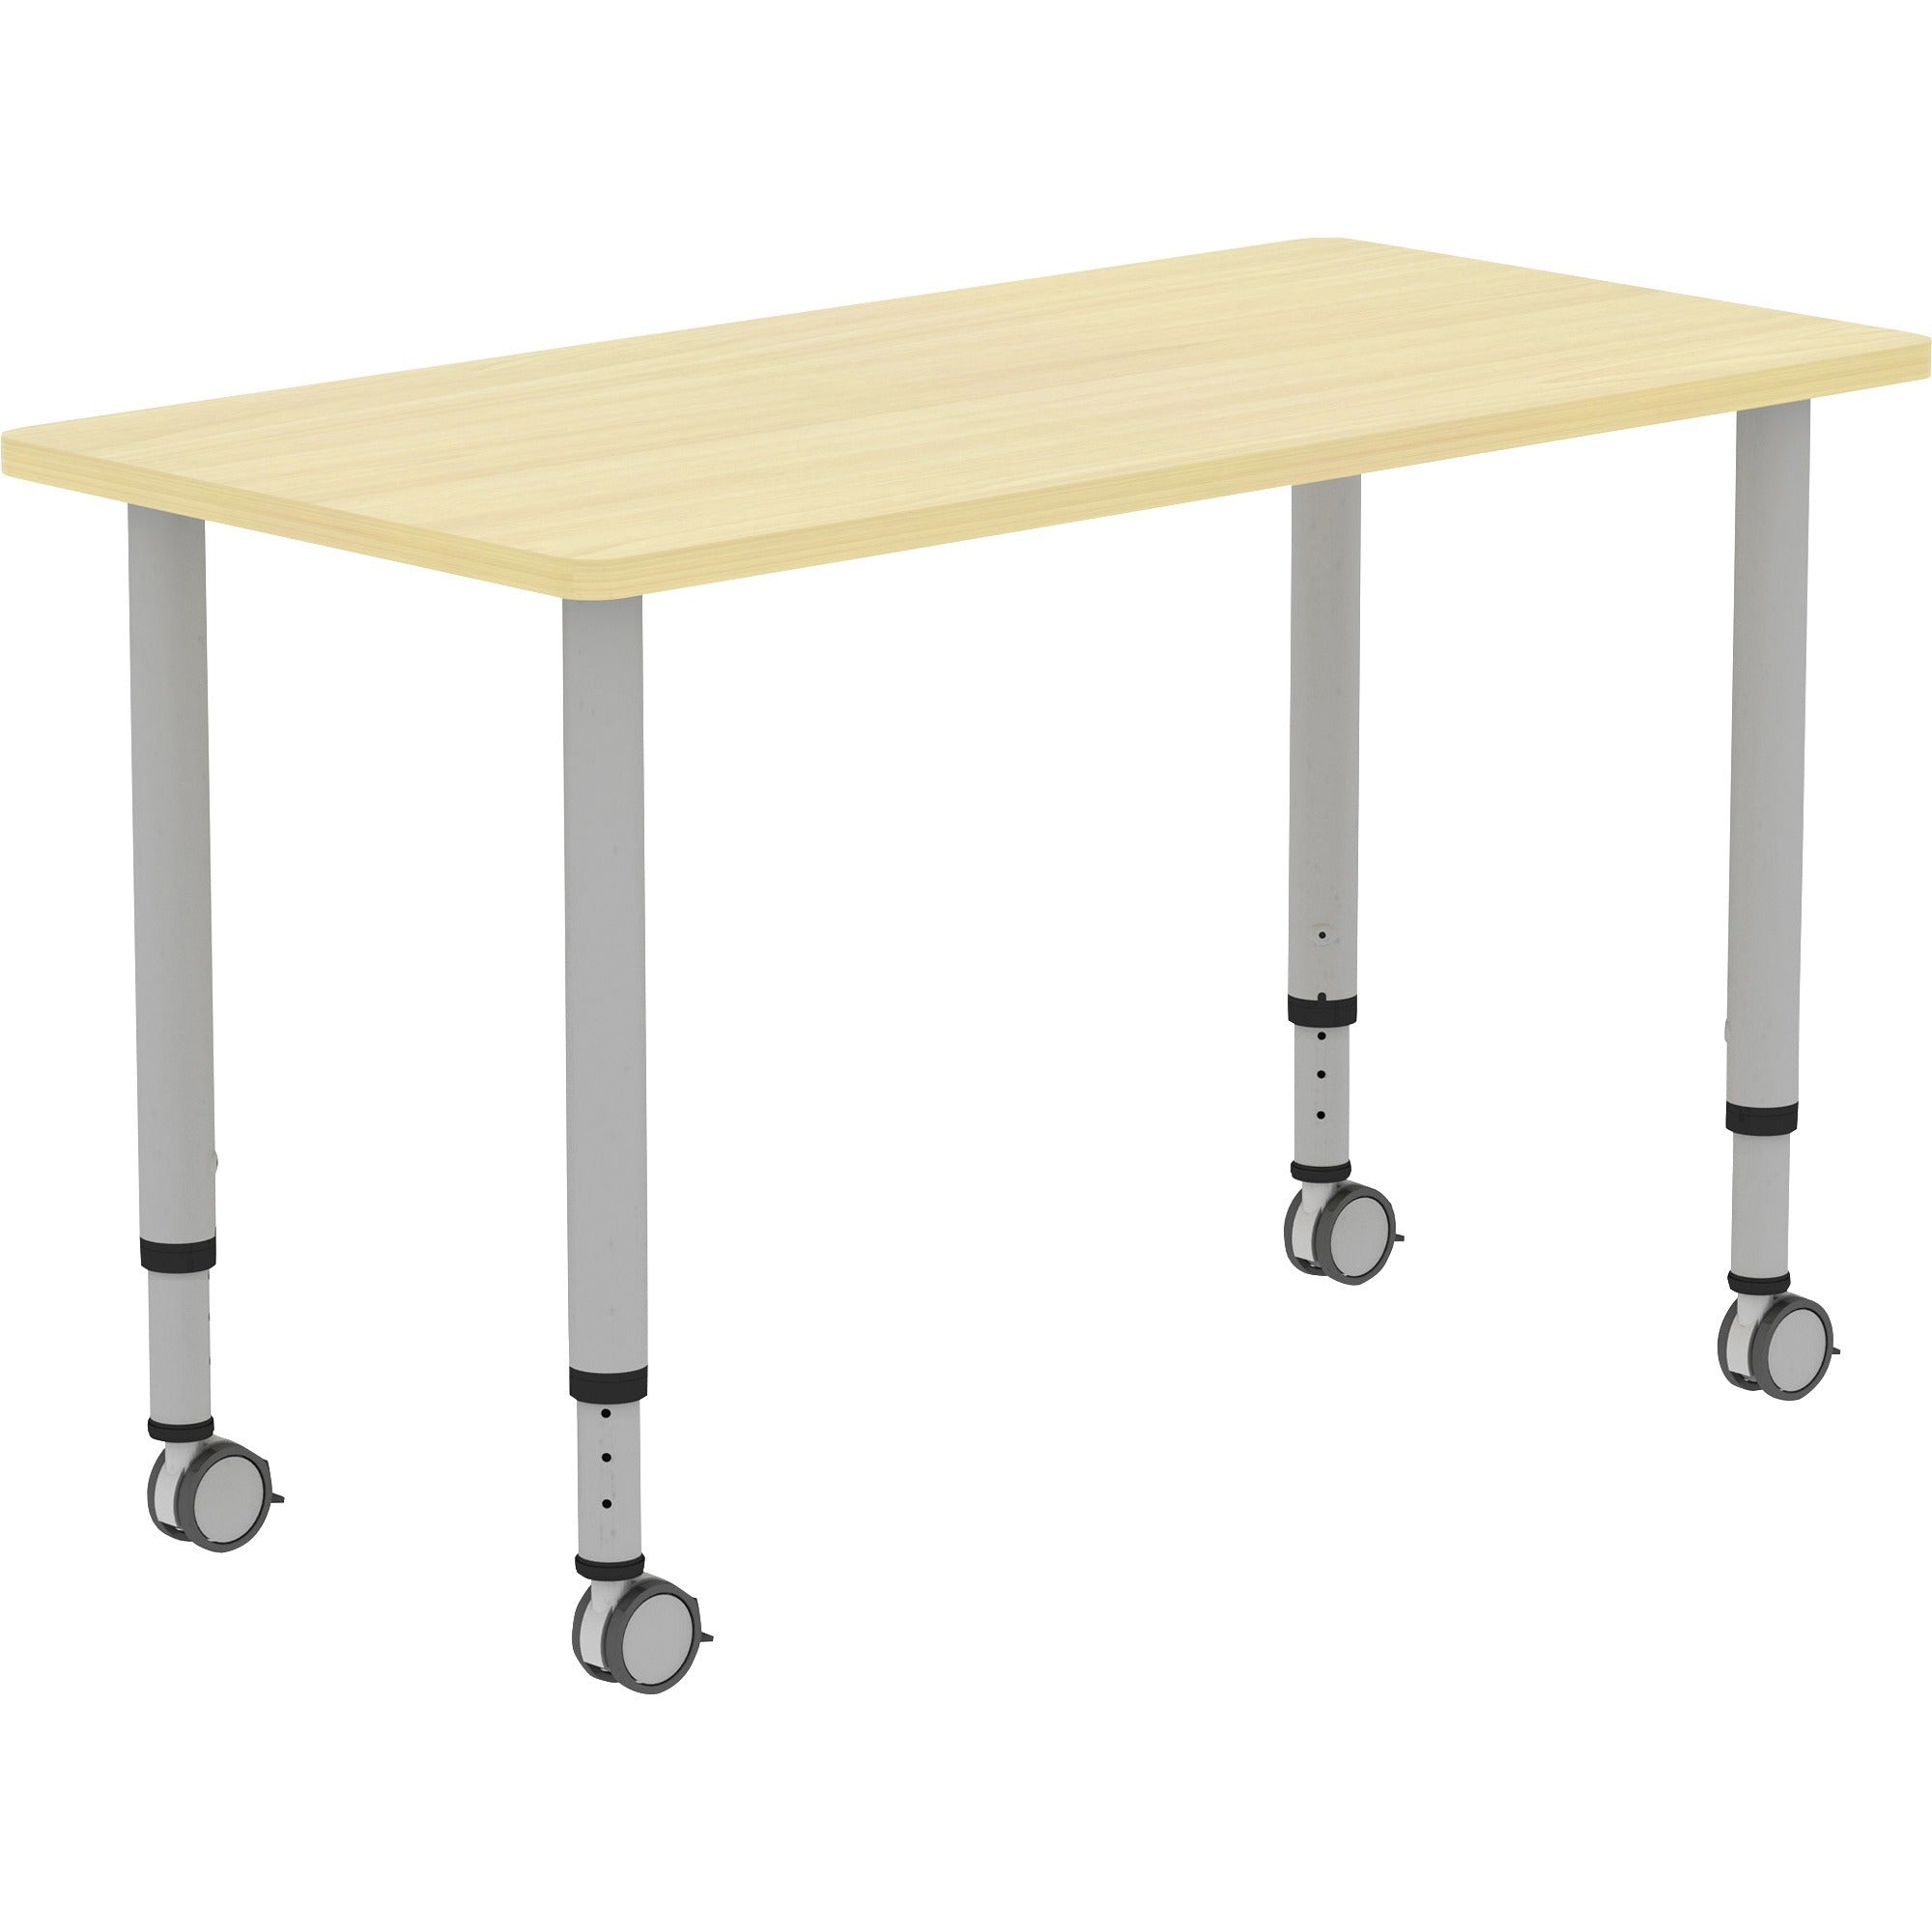 lorell-attune-height-adjustable-multipurpose-rectangular-table-for-table-toprectangle-top-adjustable-height-2662-to-3362-adjustment-x-48-table-top-width-x-2362-table-top-depth-3362-height-assembly-required-laminated-maple-la_llr69582 - 1